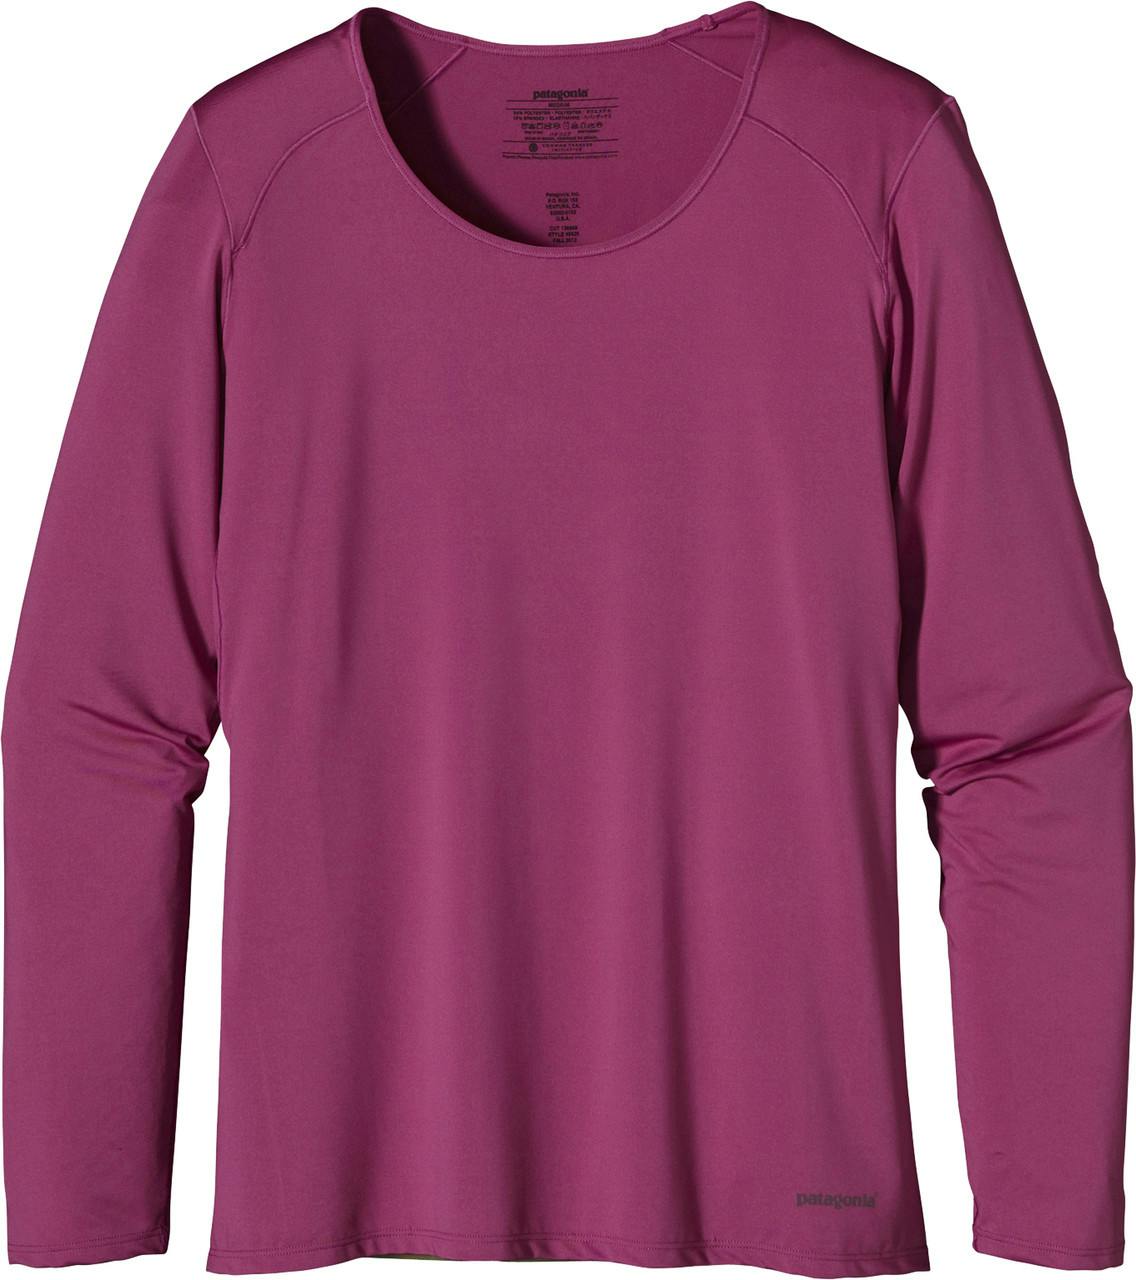 Capilene 1 Silkweight Stretch Long-Sleeved Crew Rossi Pink